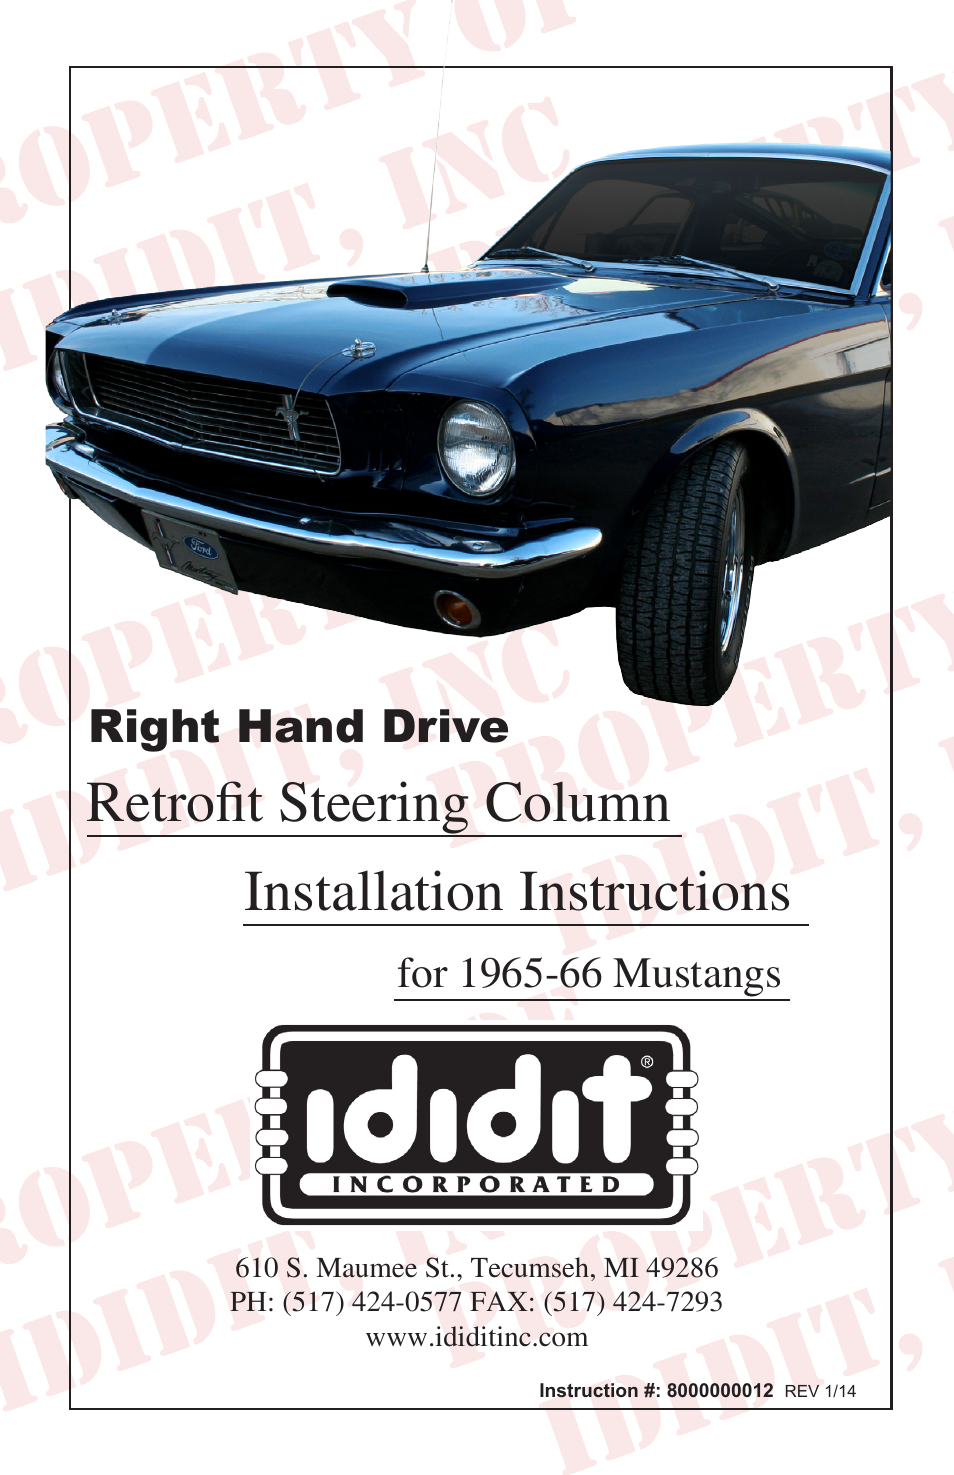 Right Hand Drive & Collapsible Steering Column: RHD 1965-66 Mustang